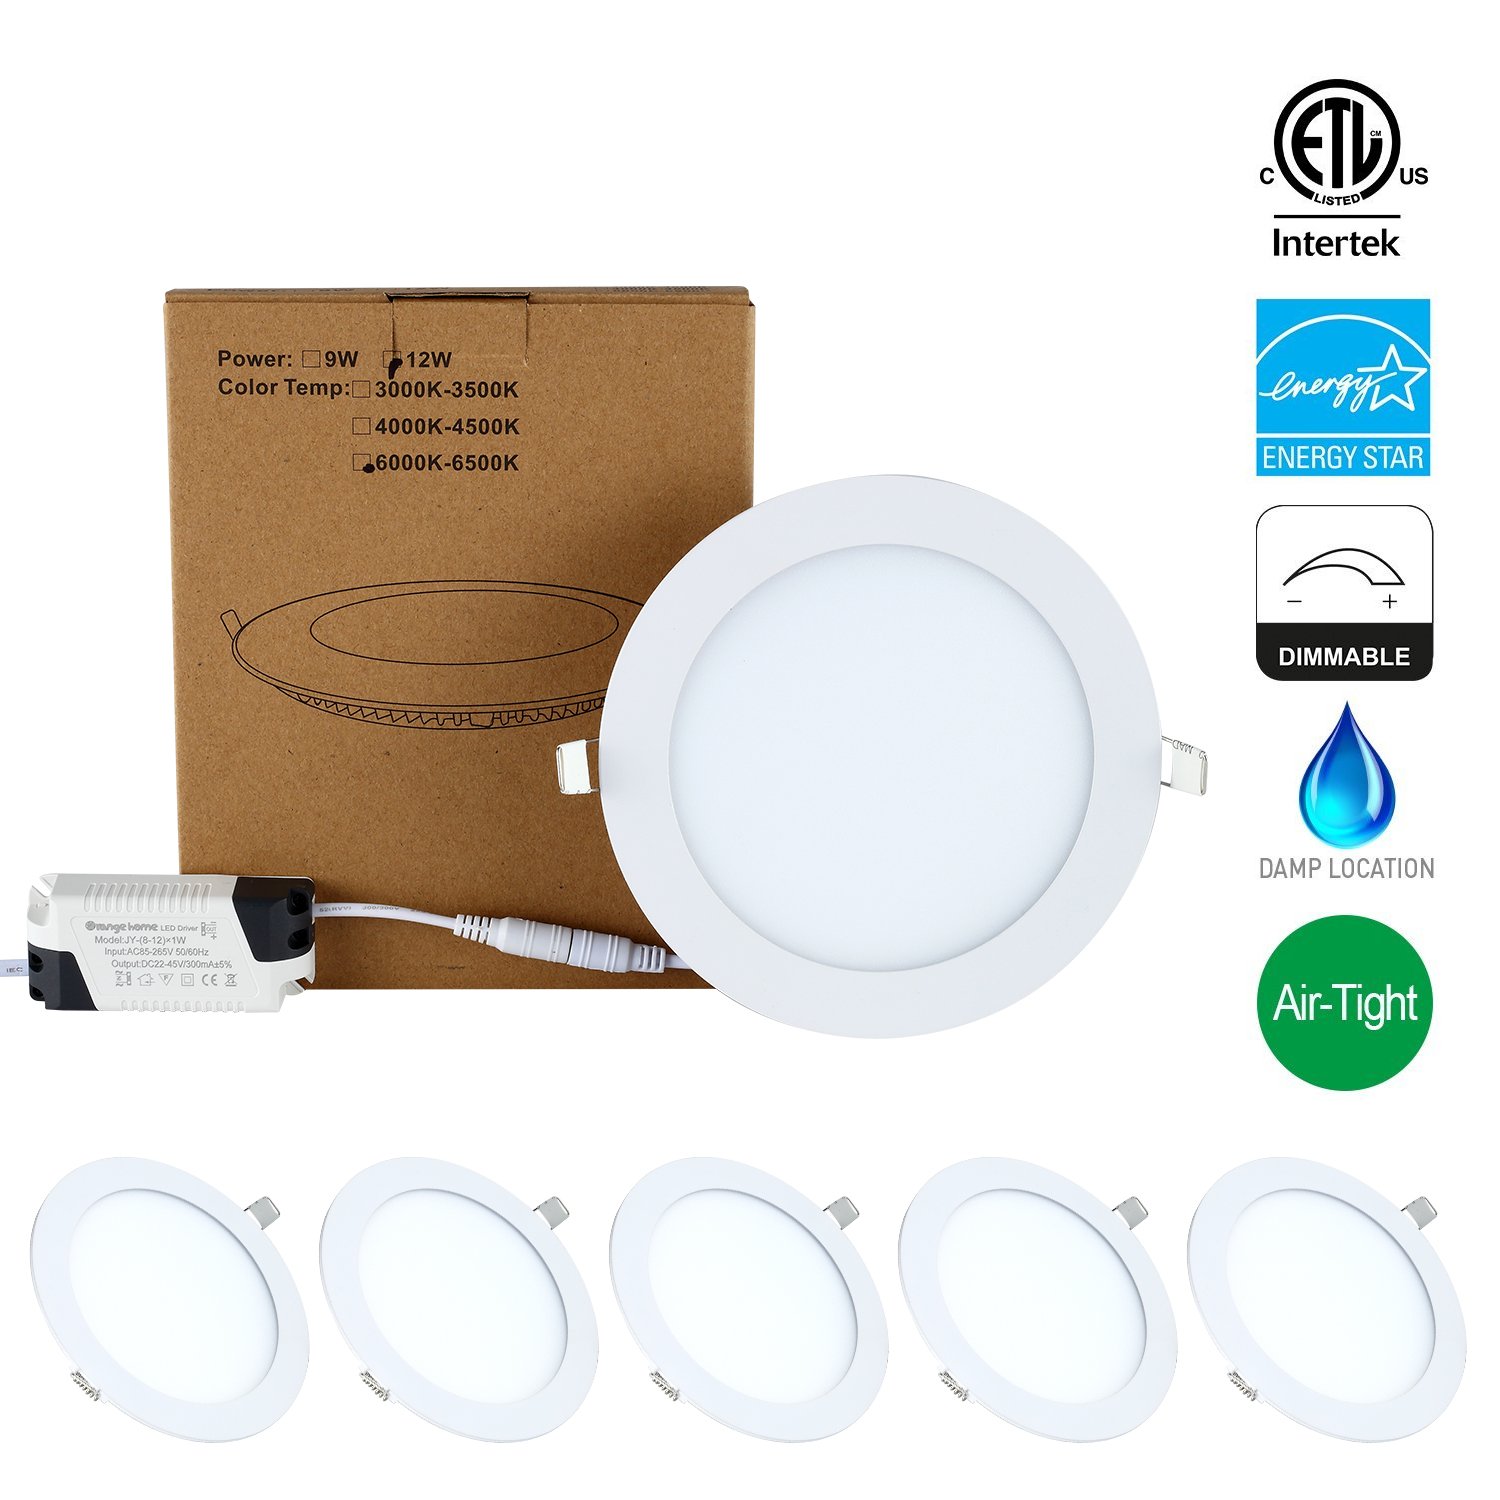 Ultra-Thin Round LED Panel Light, 1001lm, 12W Equivalent, LED Ceiling Light LED Recessed Downlight with 110V LED Driver（6 Pack）